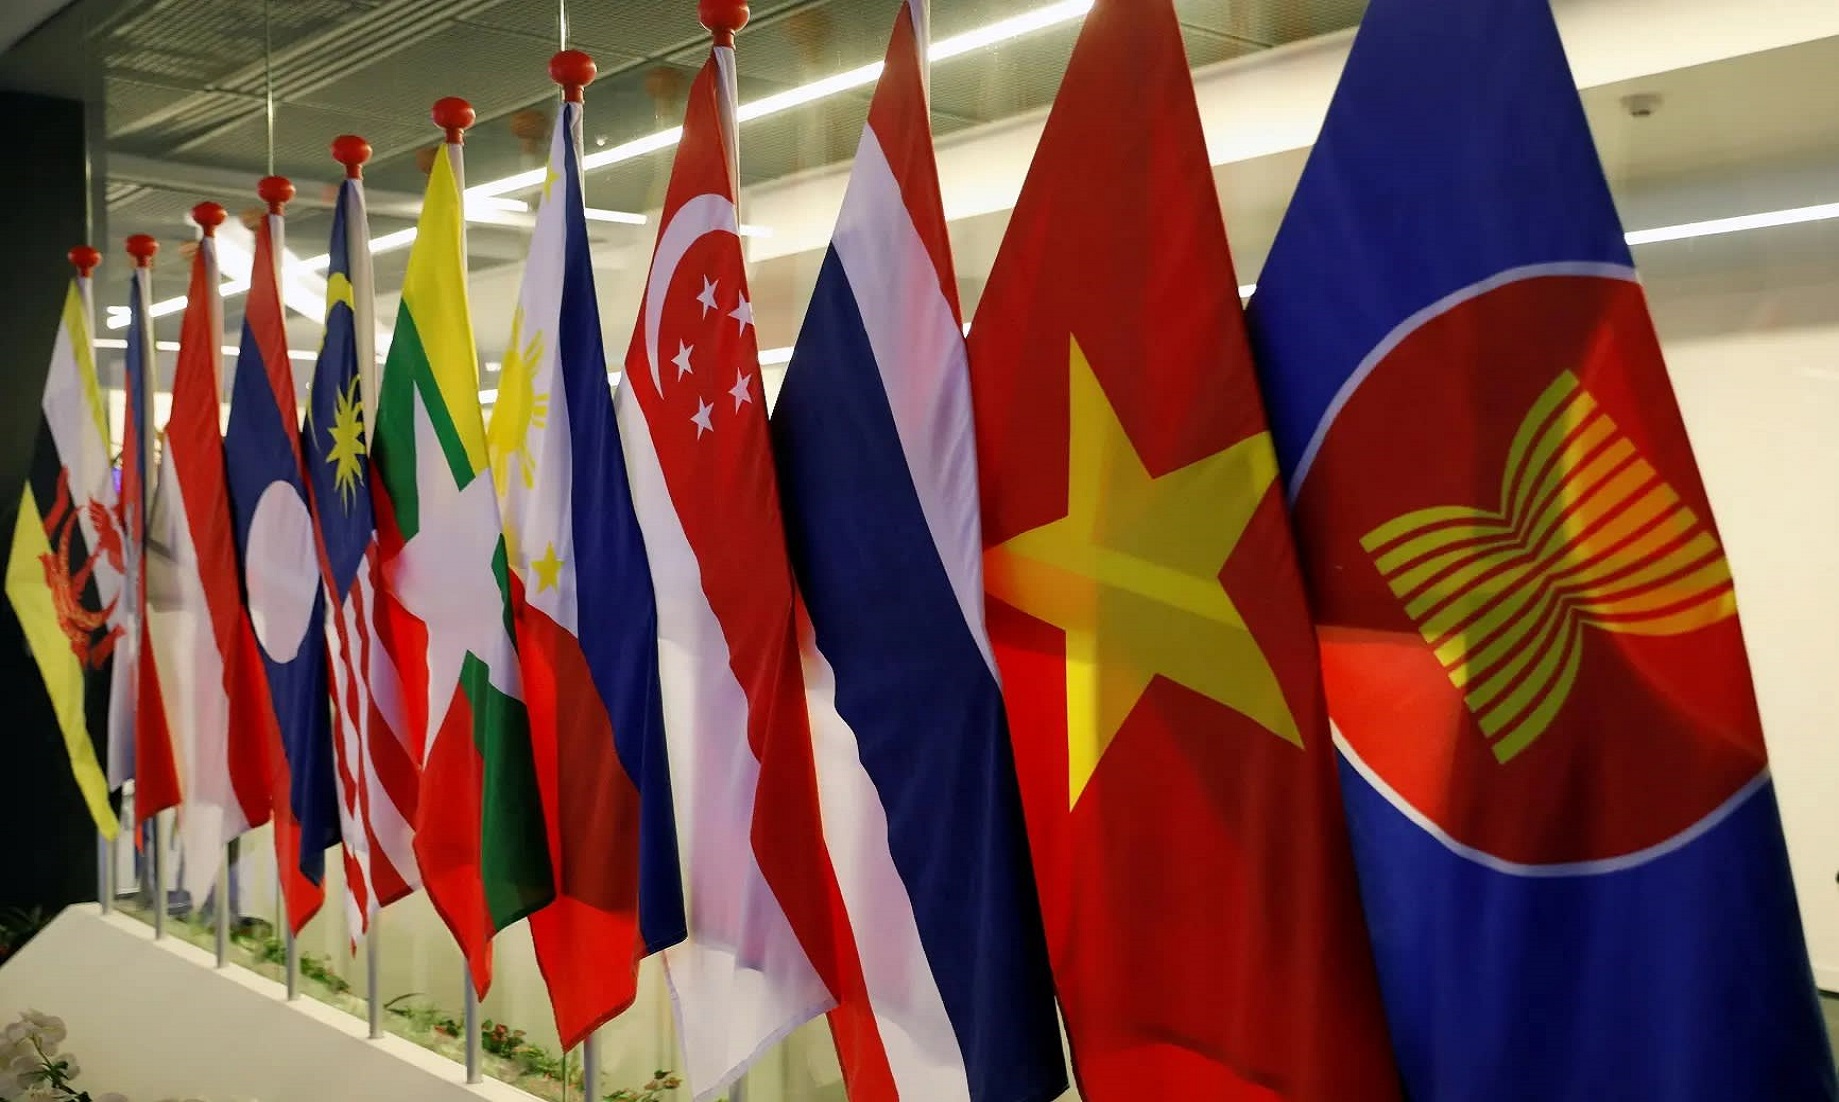 Singapore: Decision To Exclude Myanmar Junta From Asean Meetings Should Be Maintained